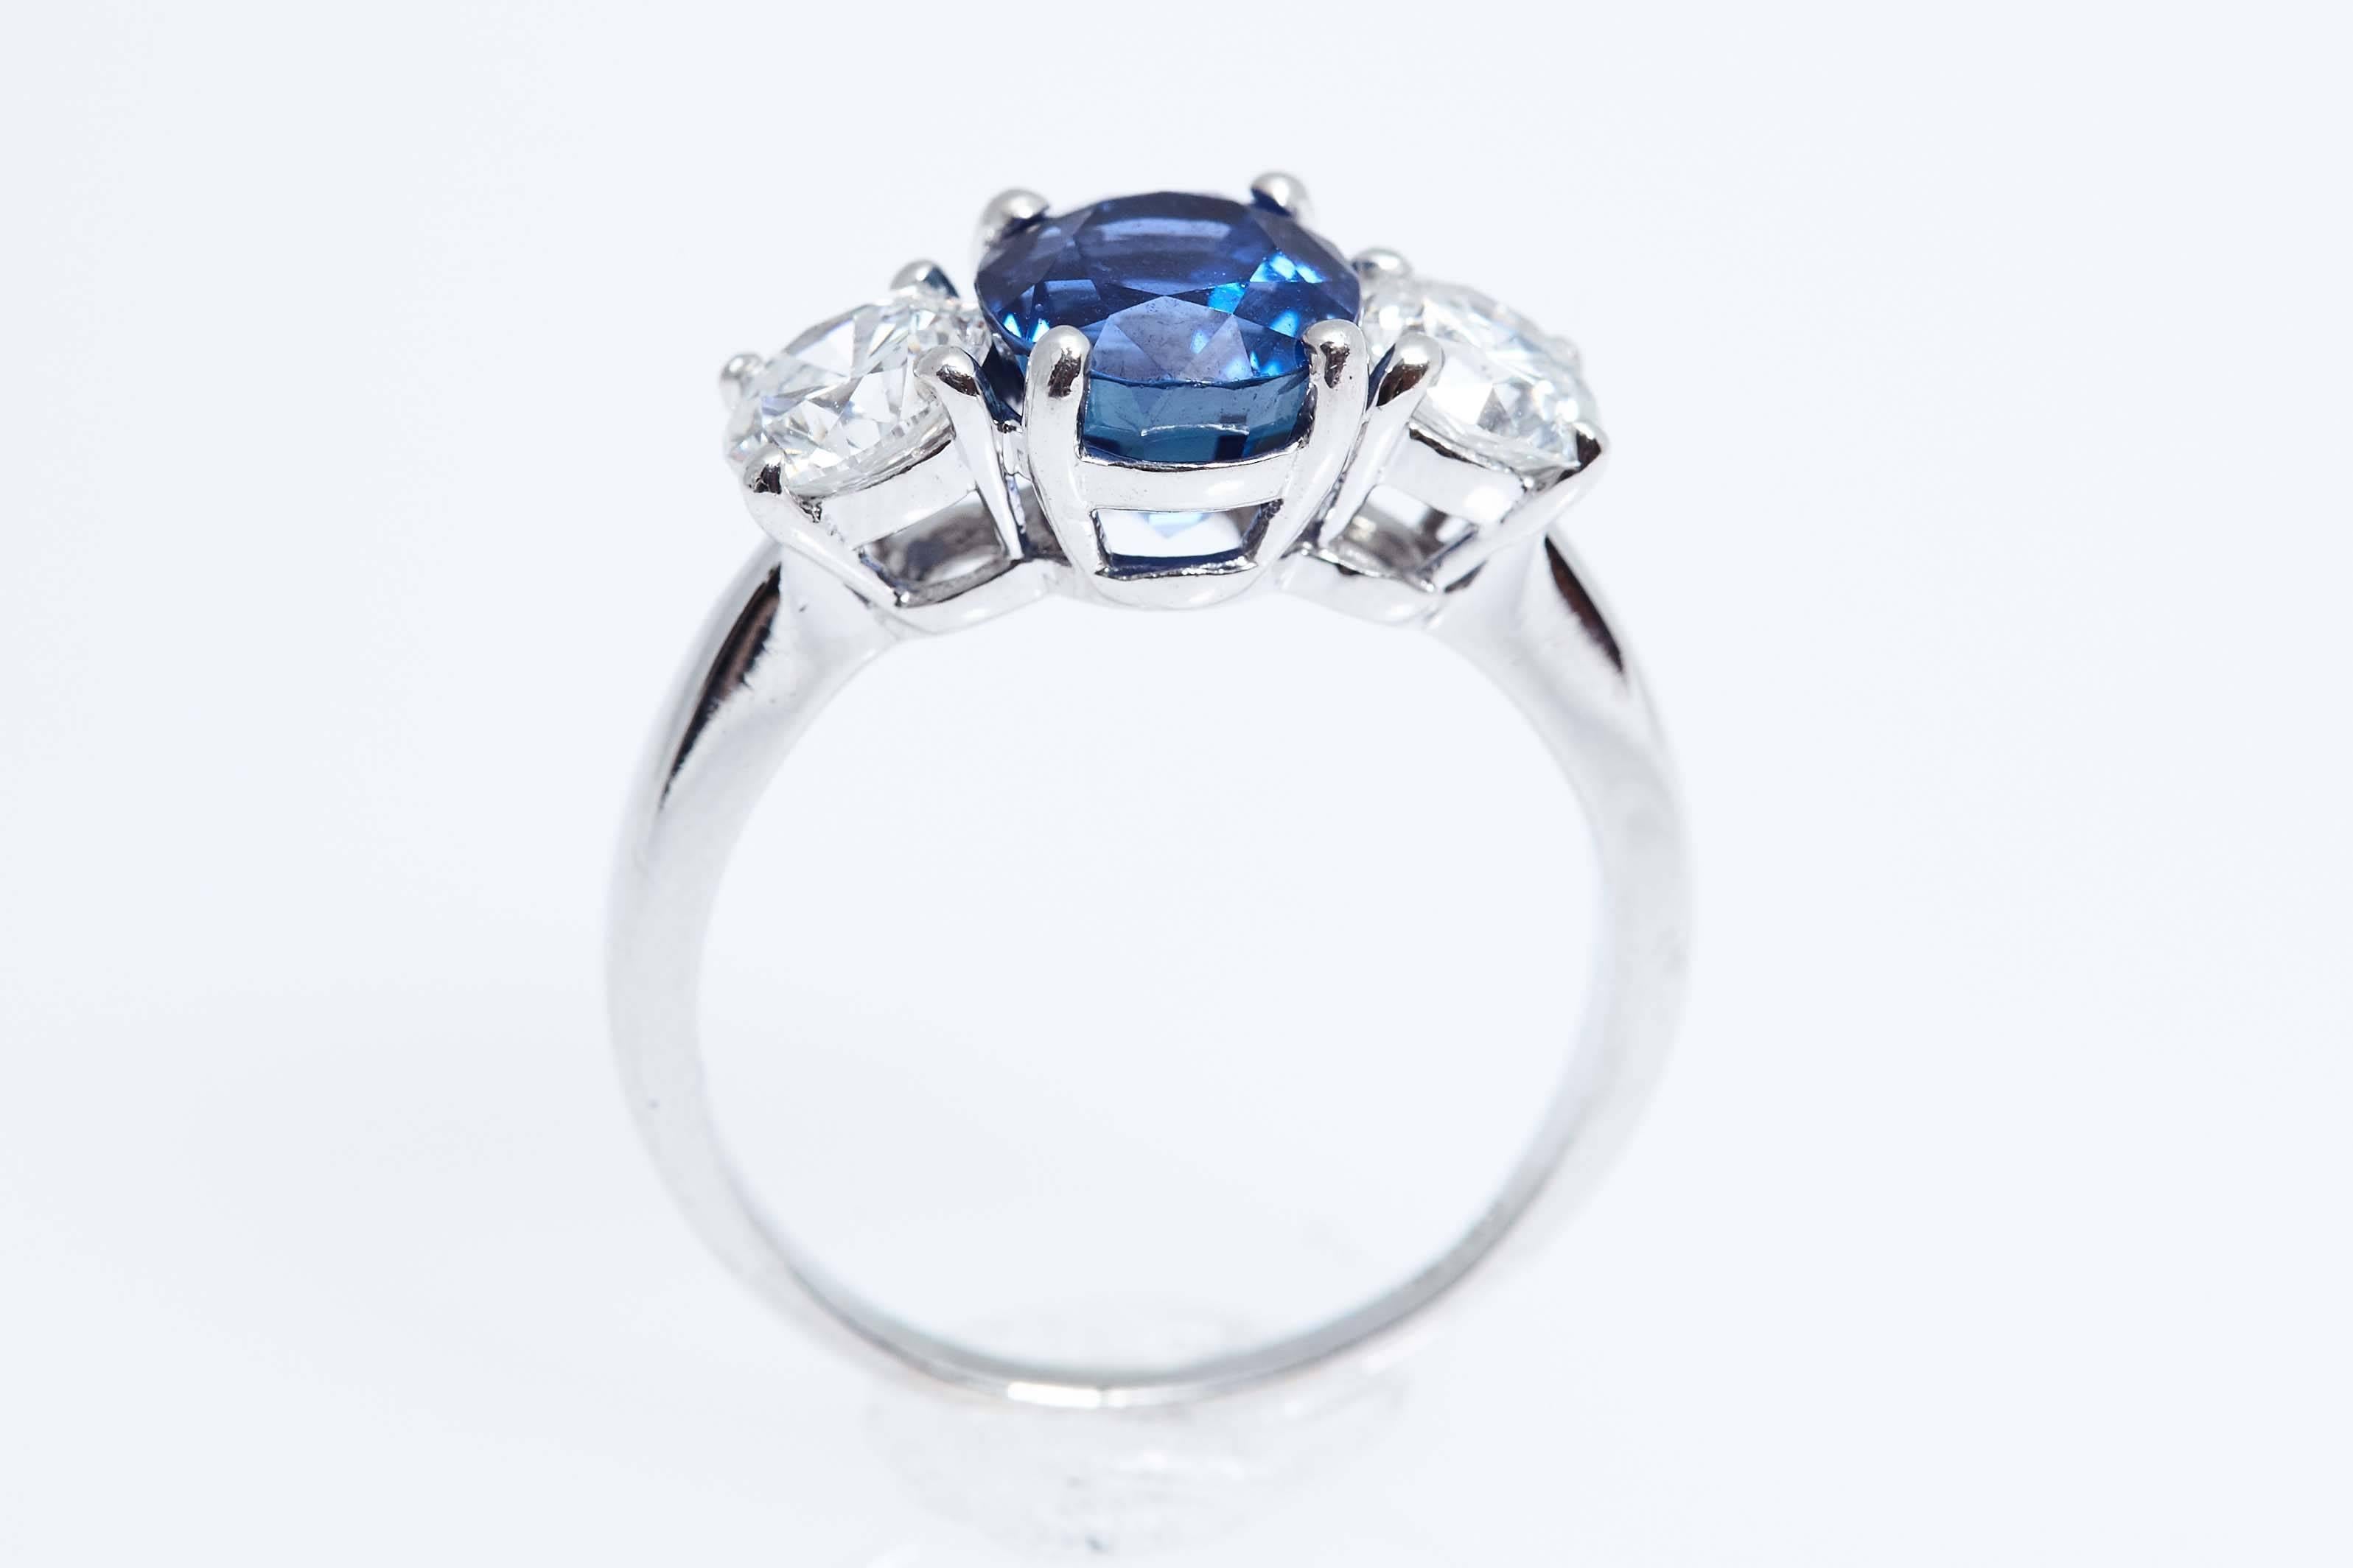 Platinum ring with a blue oval sapphire weighing 2.74 carats and 2 round diamonds with a total weight of approximately 1.20 carats.  The sapphire has a certificate from the American Gemological Laboratories stating that it has no heat treatment and